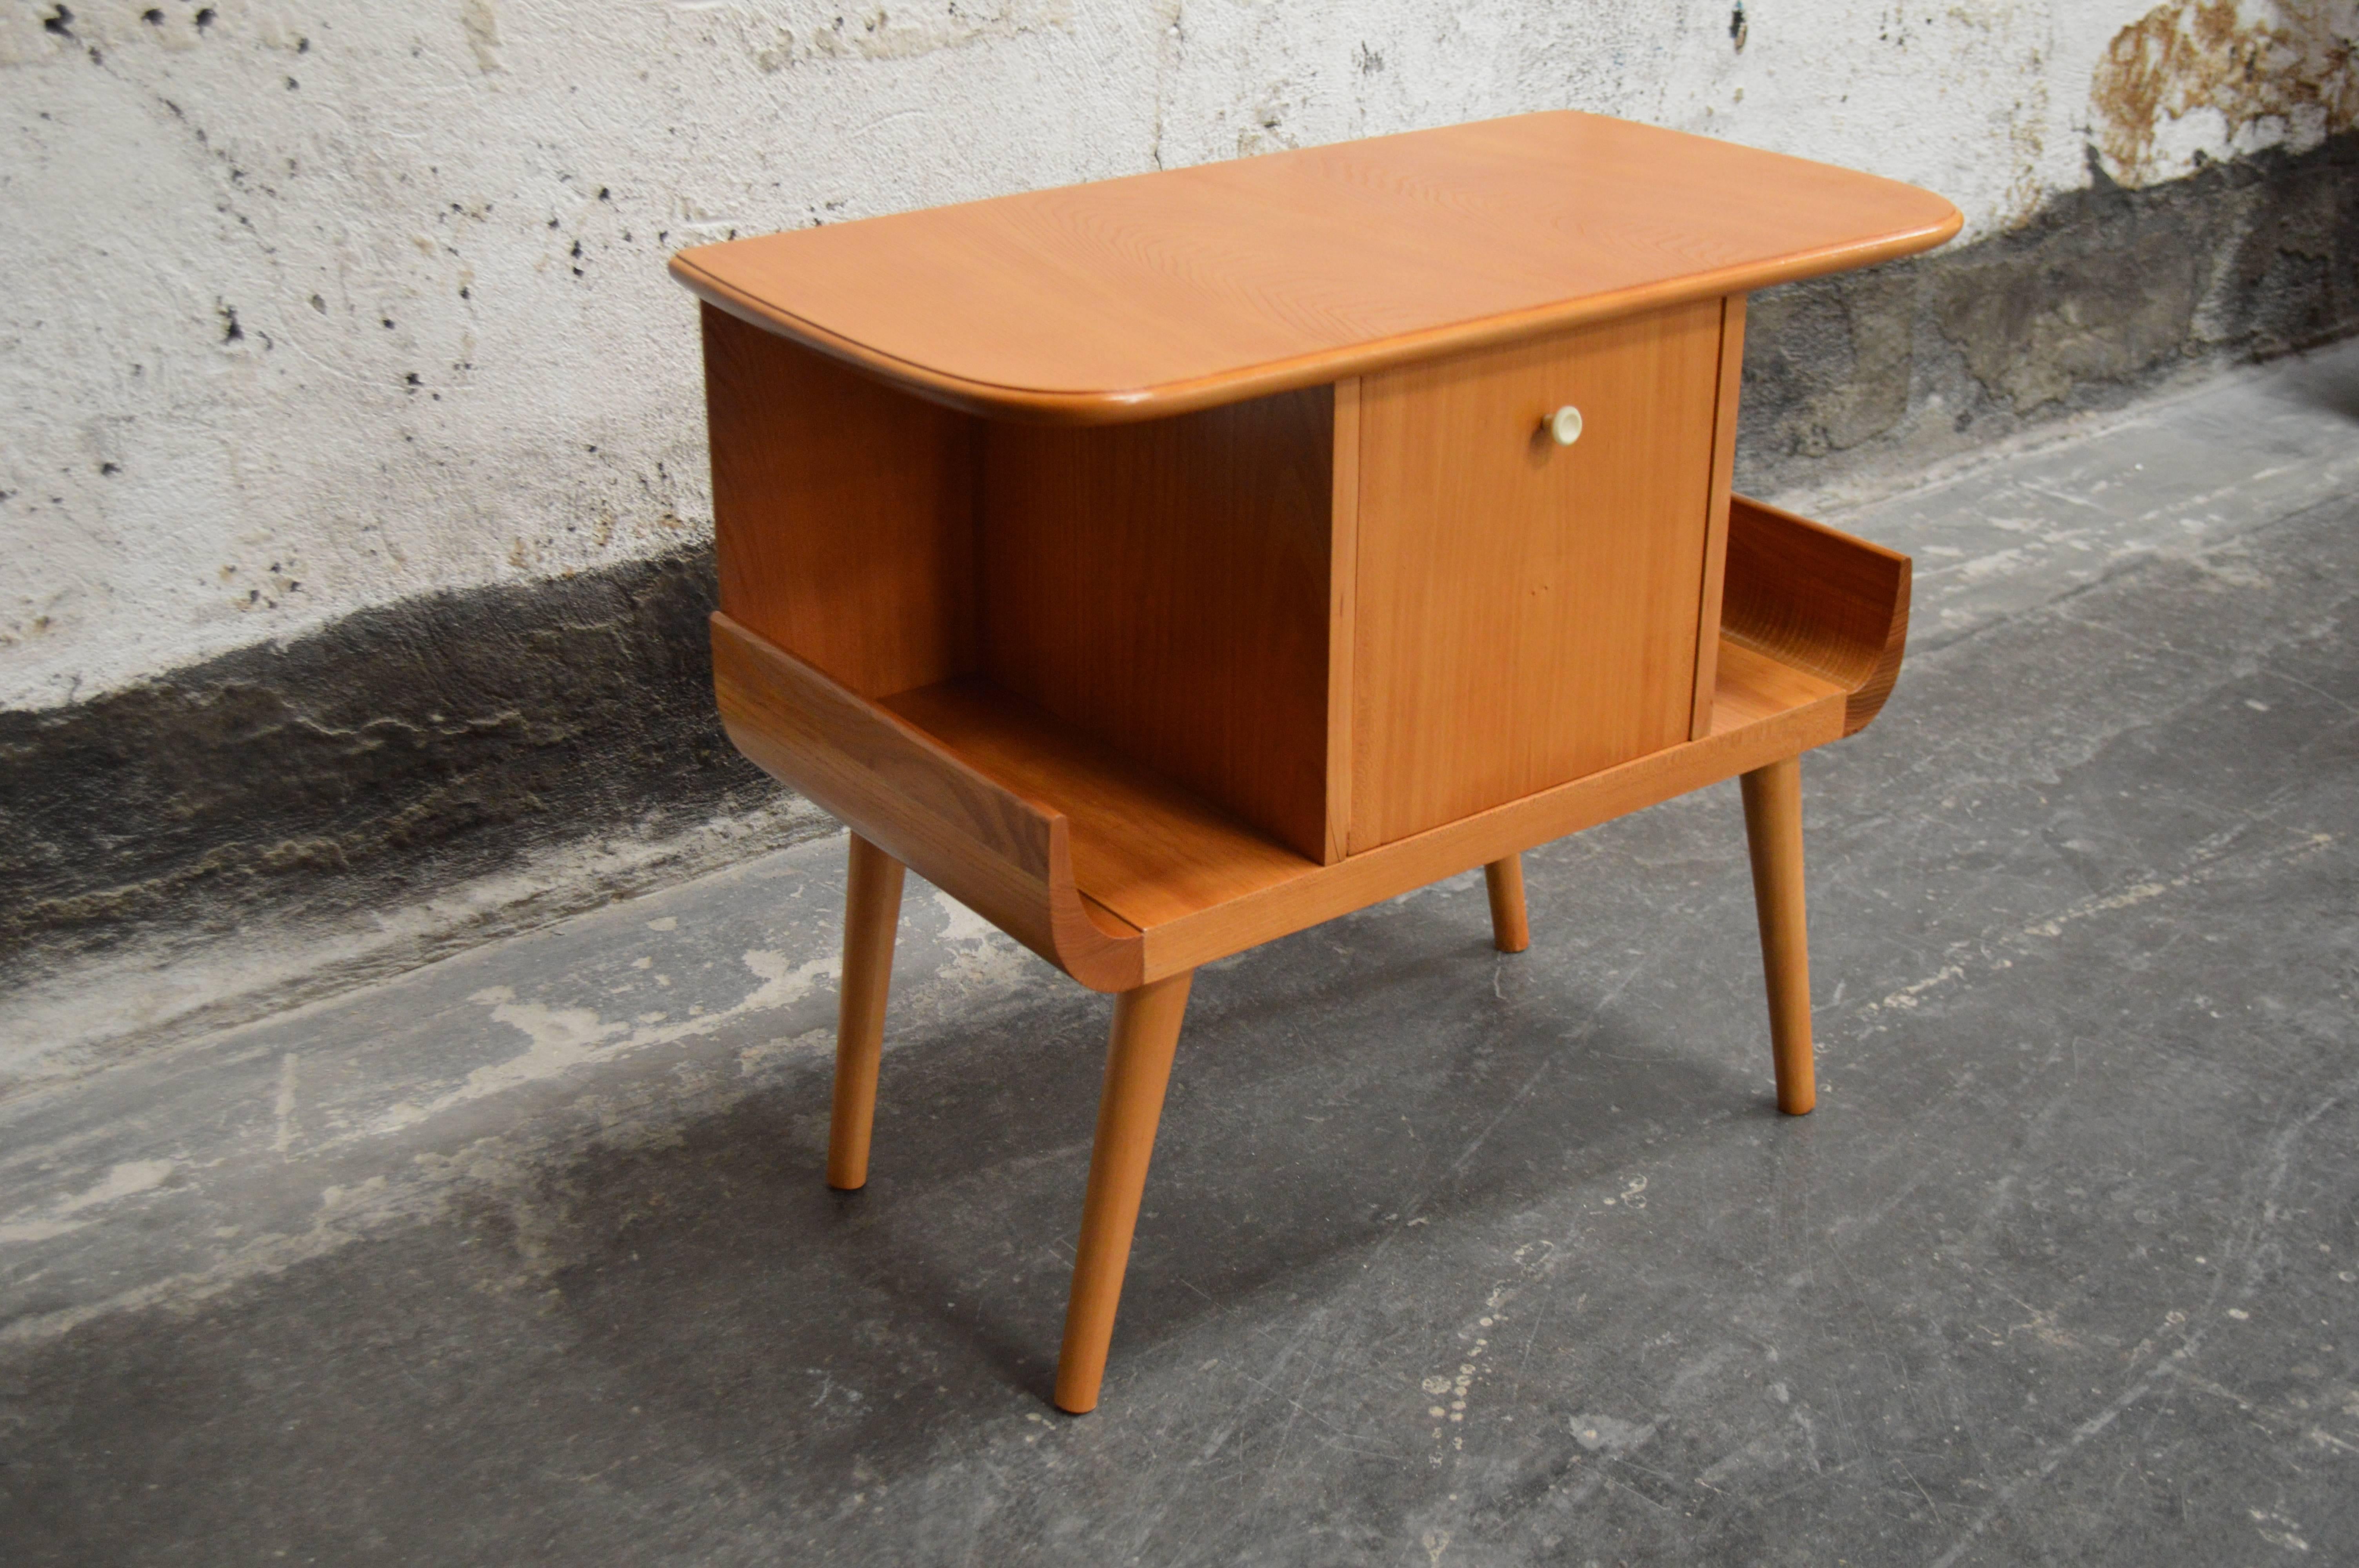 Unique Swedish Mid-Century side table crafted of golden elm features open side winged shelves with a storage cabinet in the center. Great petite piece with lots of style. Castors can be added to the legs to make this a rolling table or small bar